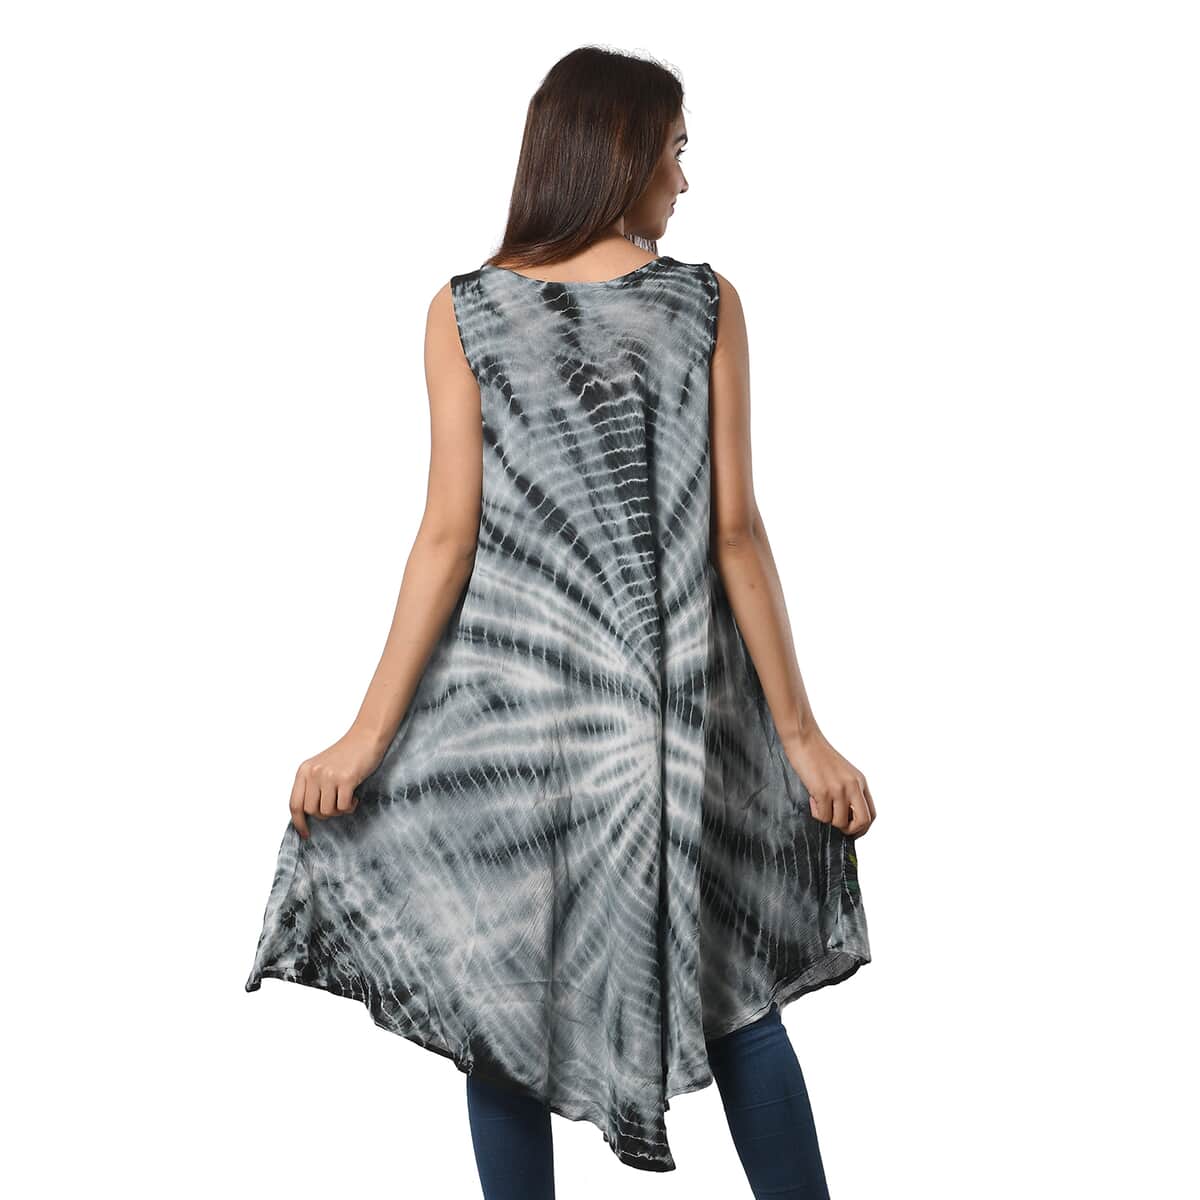 TAMSY Black Stripe Tie Dye with Floral Umbrella Dress - One Size Fits Most (48"x44") image number 1